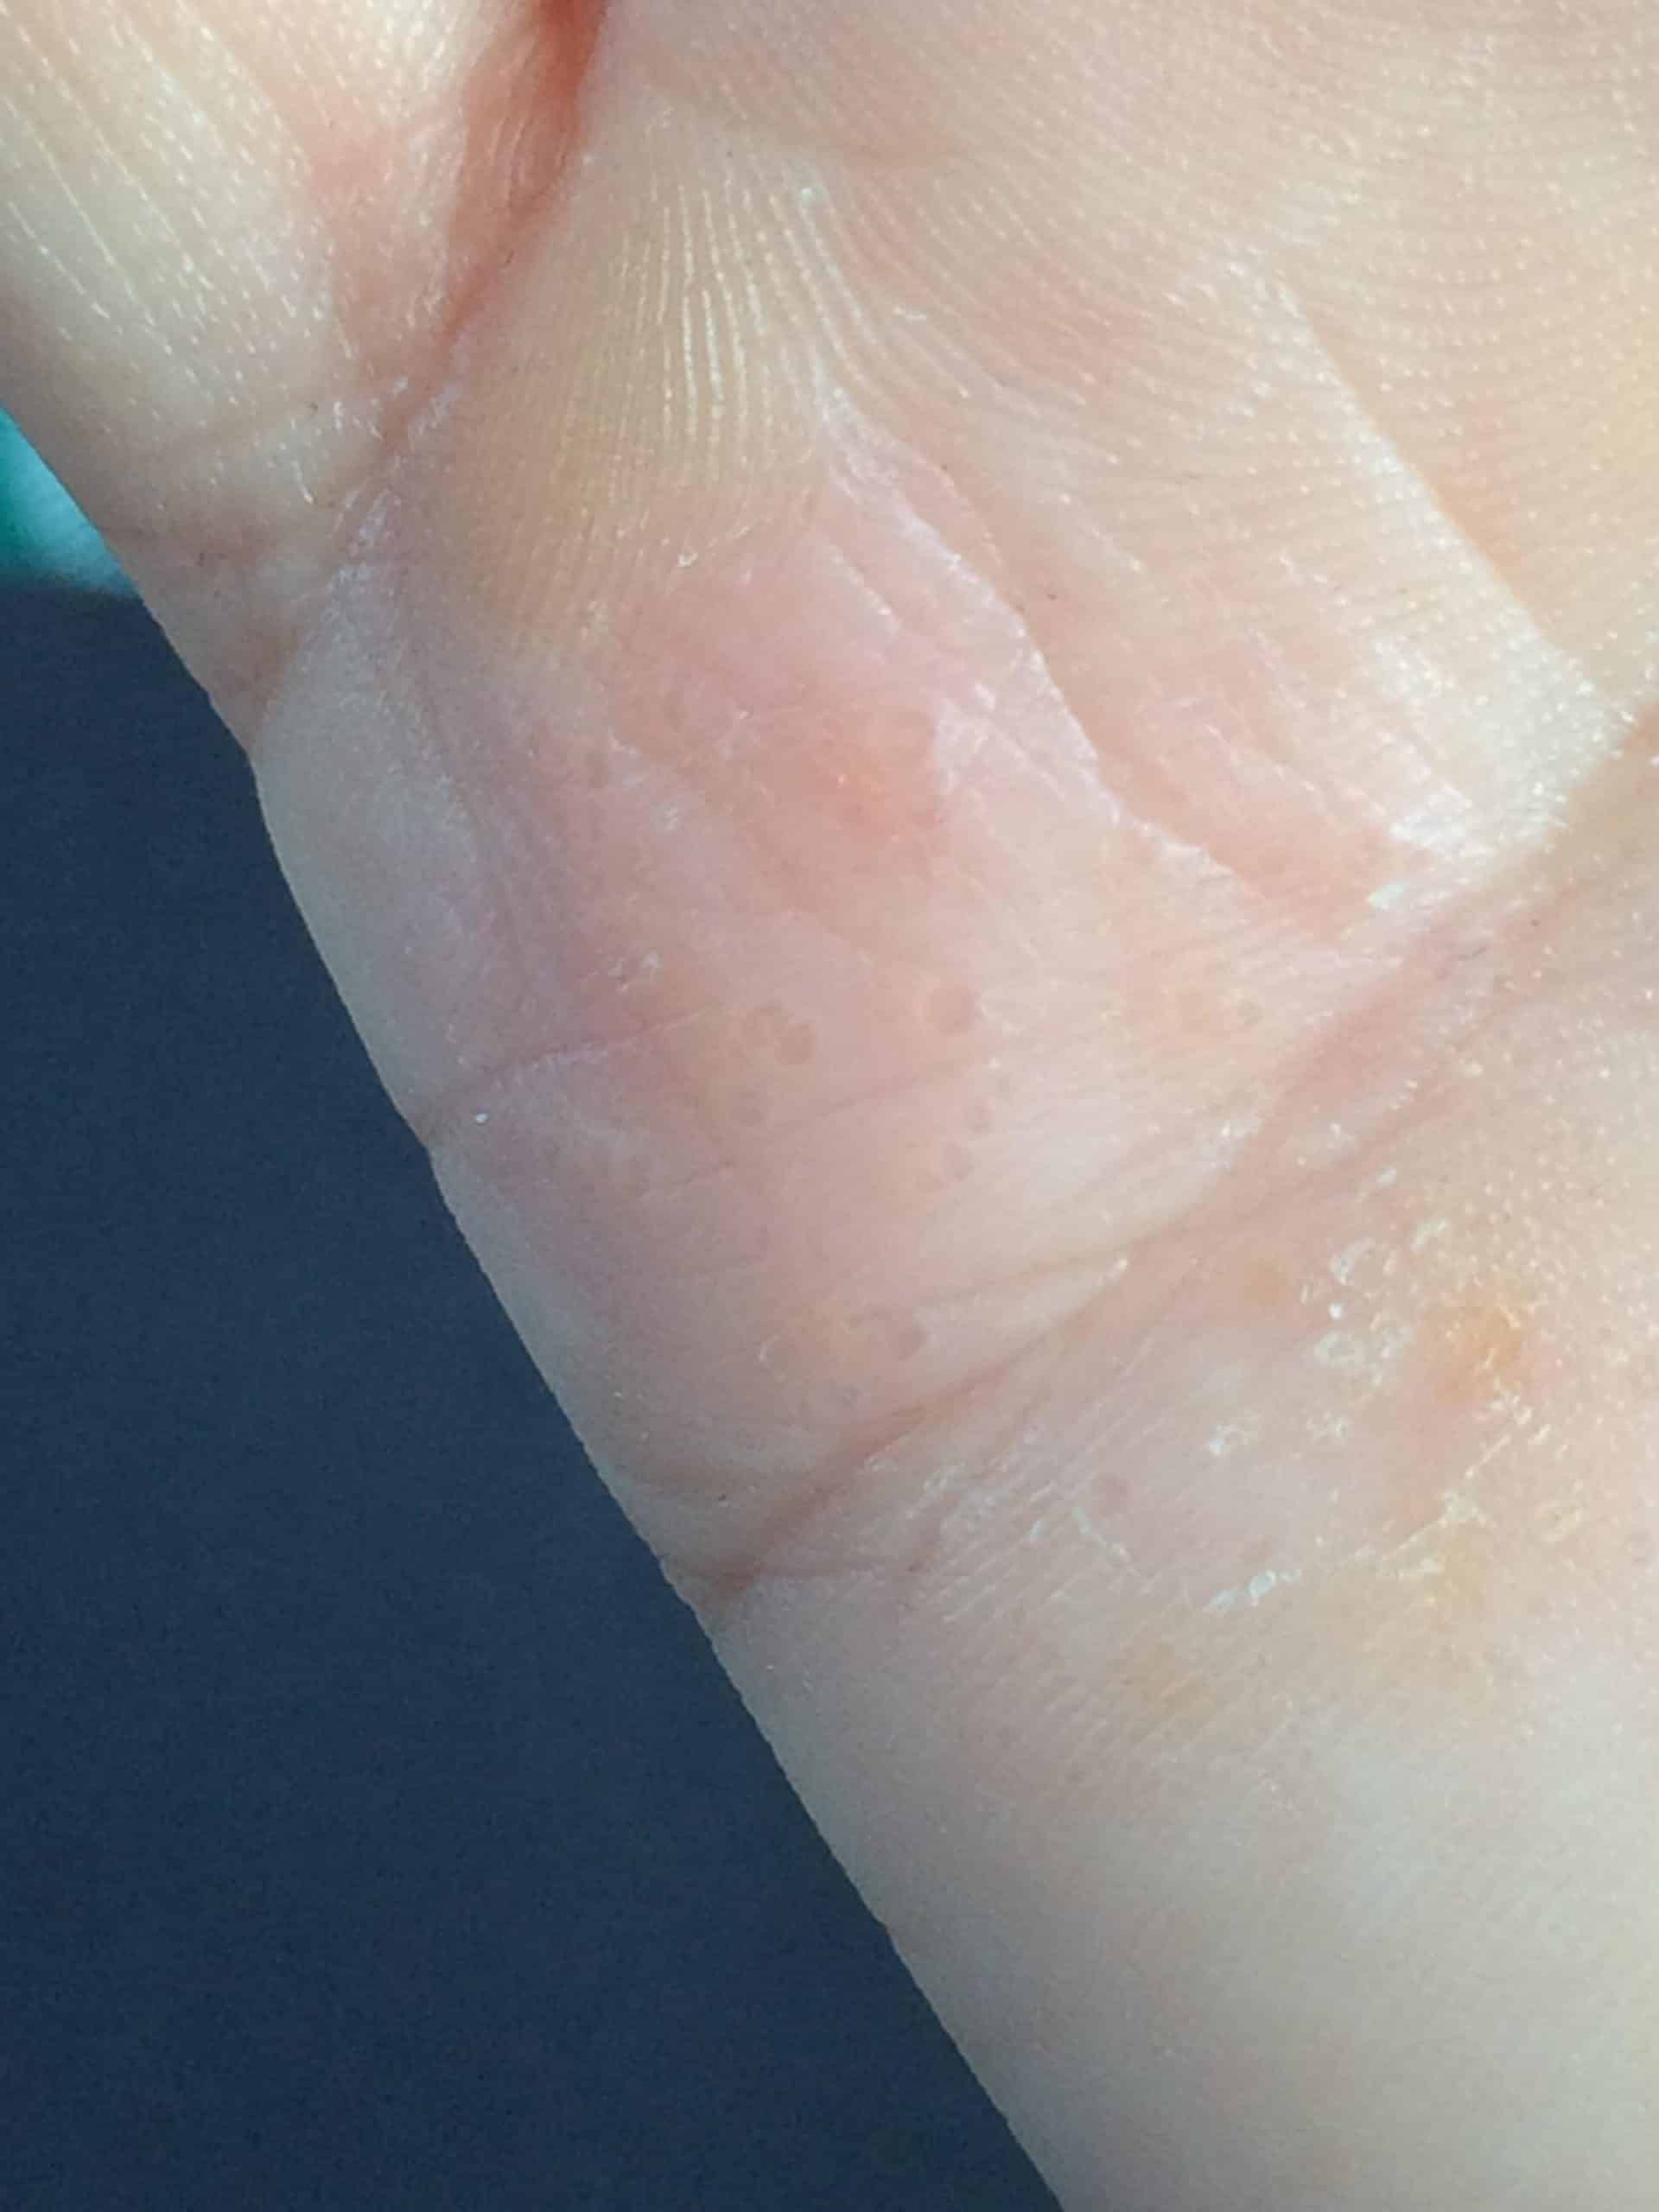 Small bumps/bubbles on hand? Any idea what these might be? : Dermatology